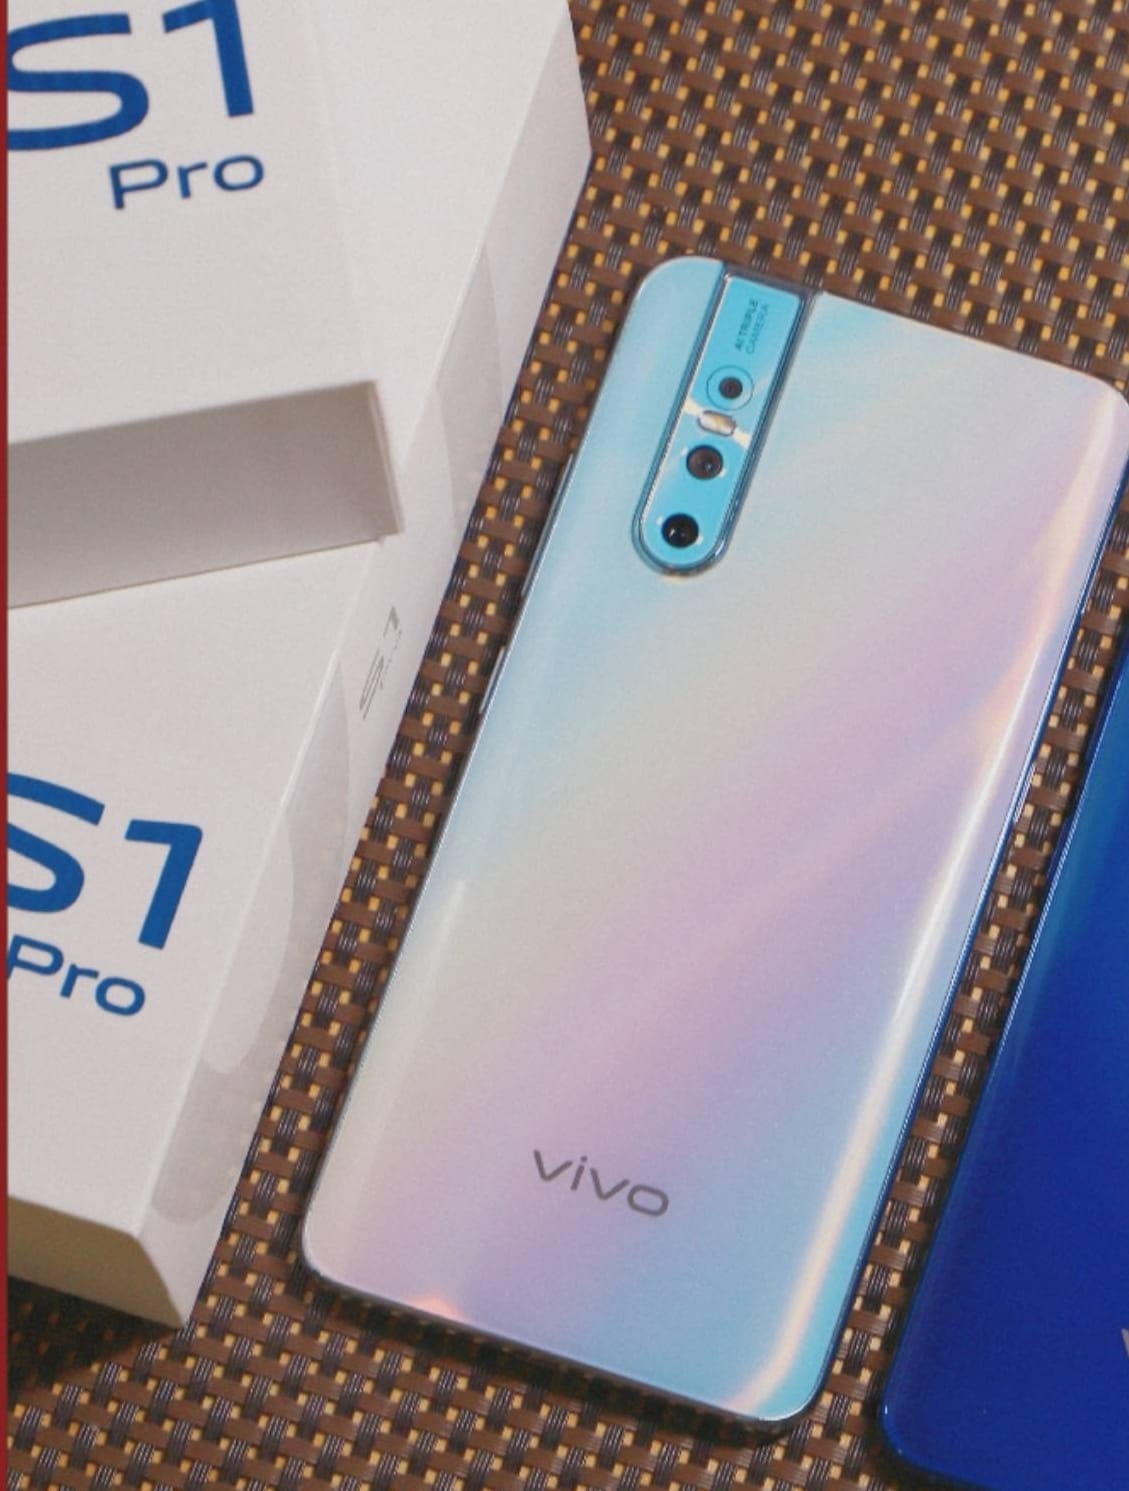 Vivo S1 Pro Price In India Leaked Ahead Of Launch Price 19 990